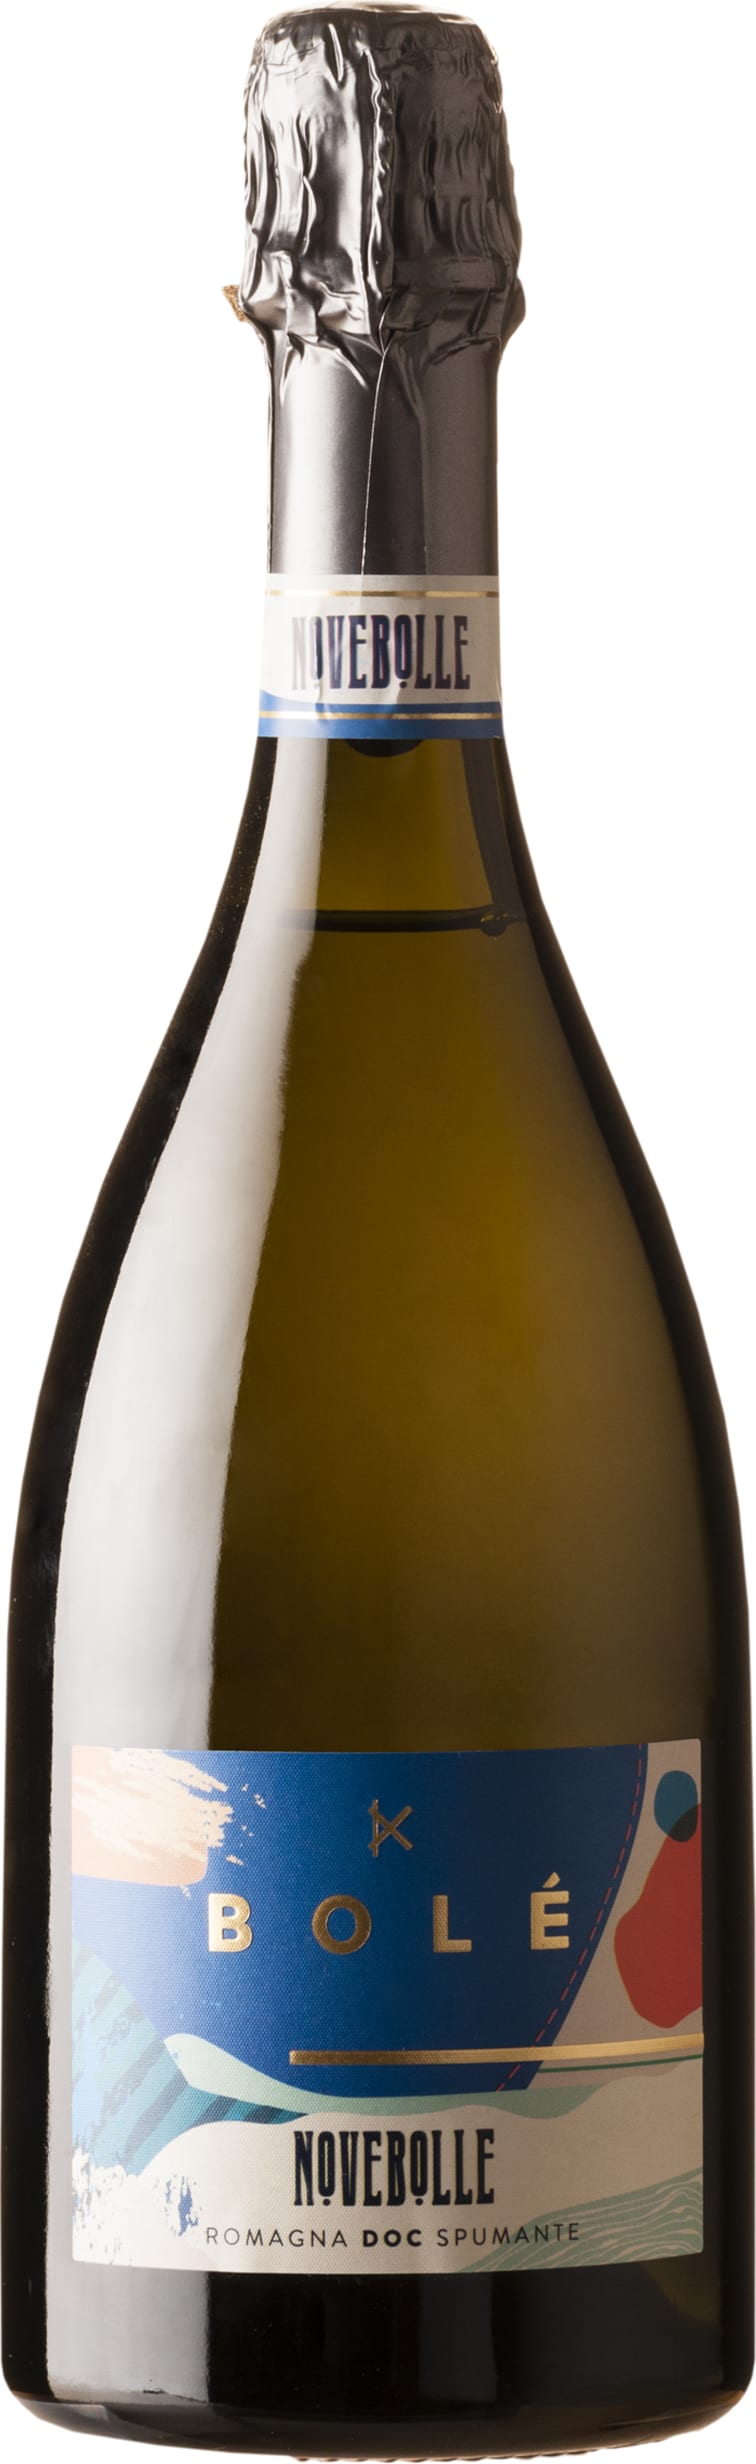 Bole Bianco Spumante Brut Romagna DOC 75cl NV - Buy Bole Wines from GREAT WINES DIRECT wine shop